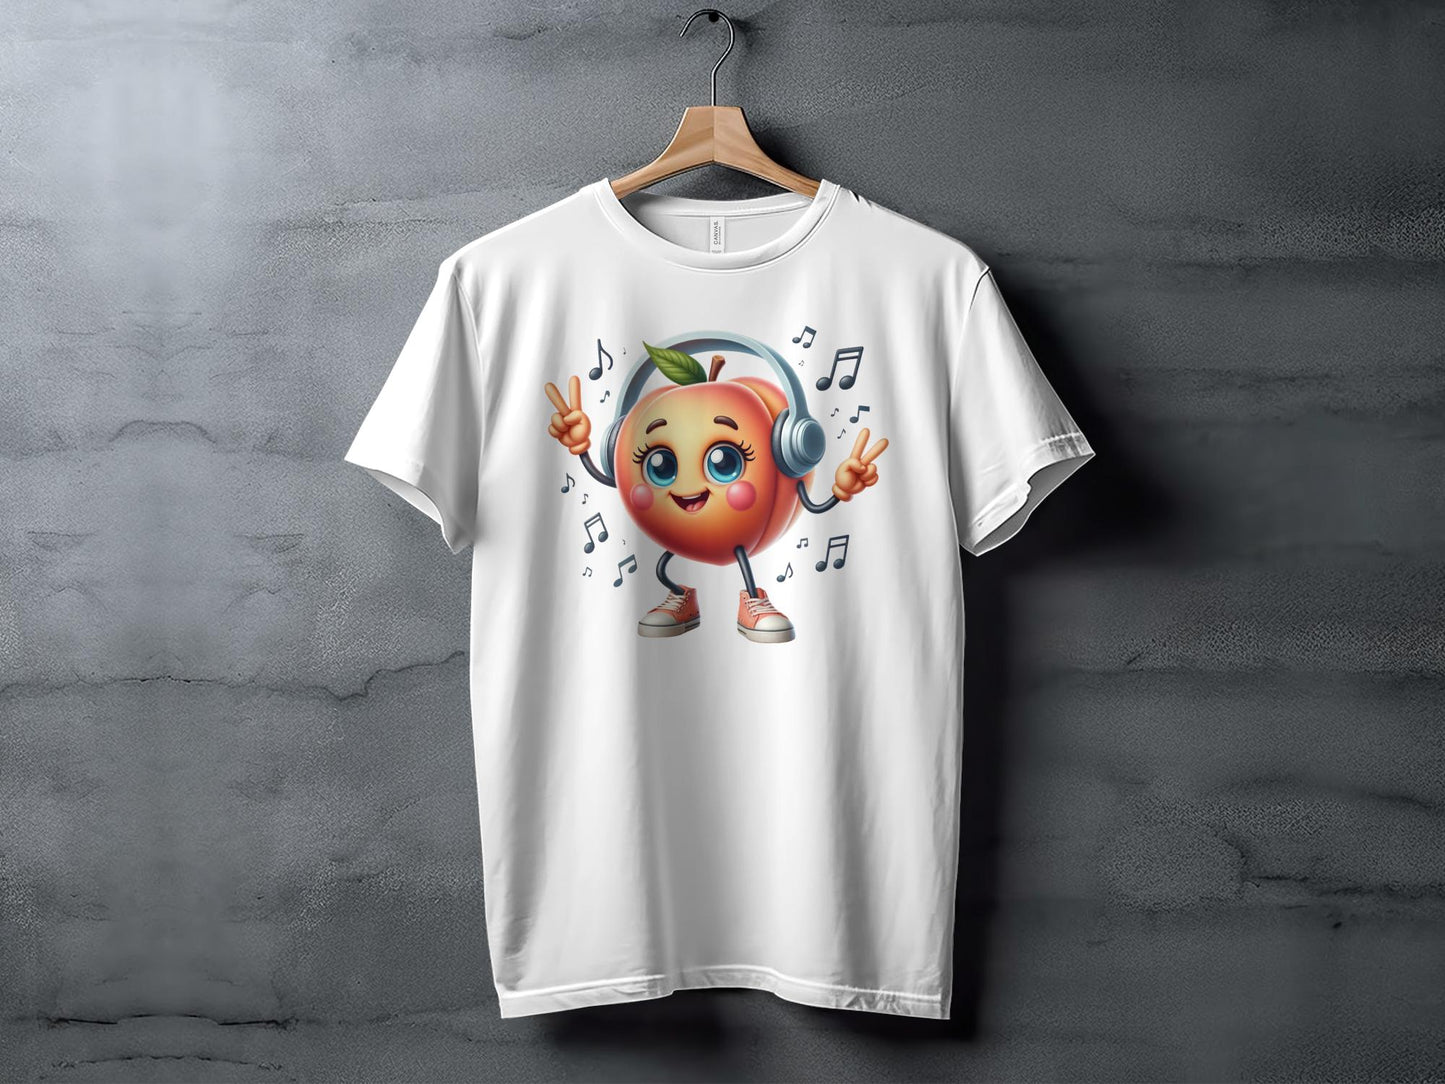 Cute Cartoon Peach with Headphones Music Lovers T-Shirt, Unisex Tee for All Ages, Fun Graphic Shirt, Perfect Gift Idea